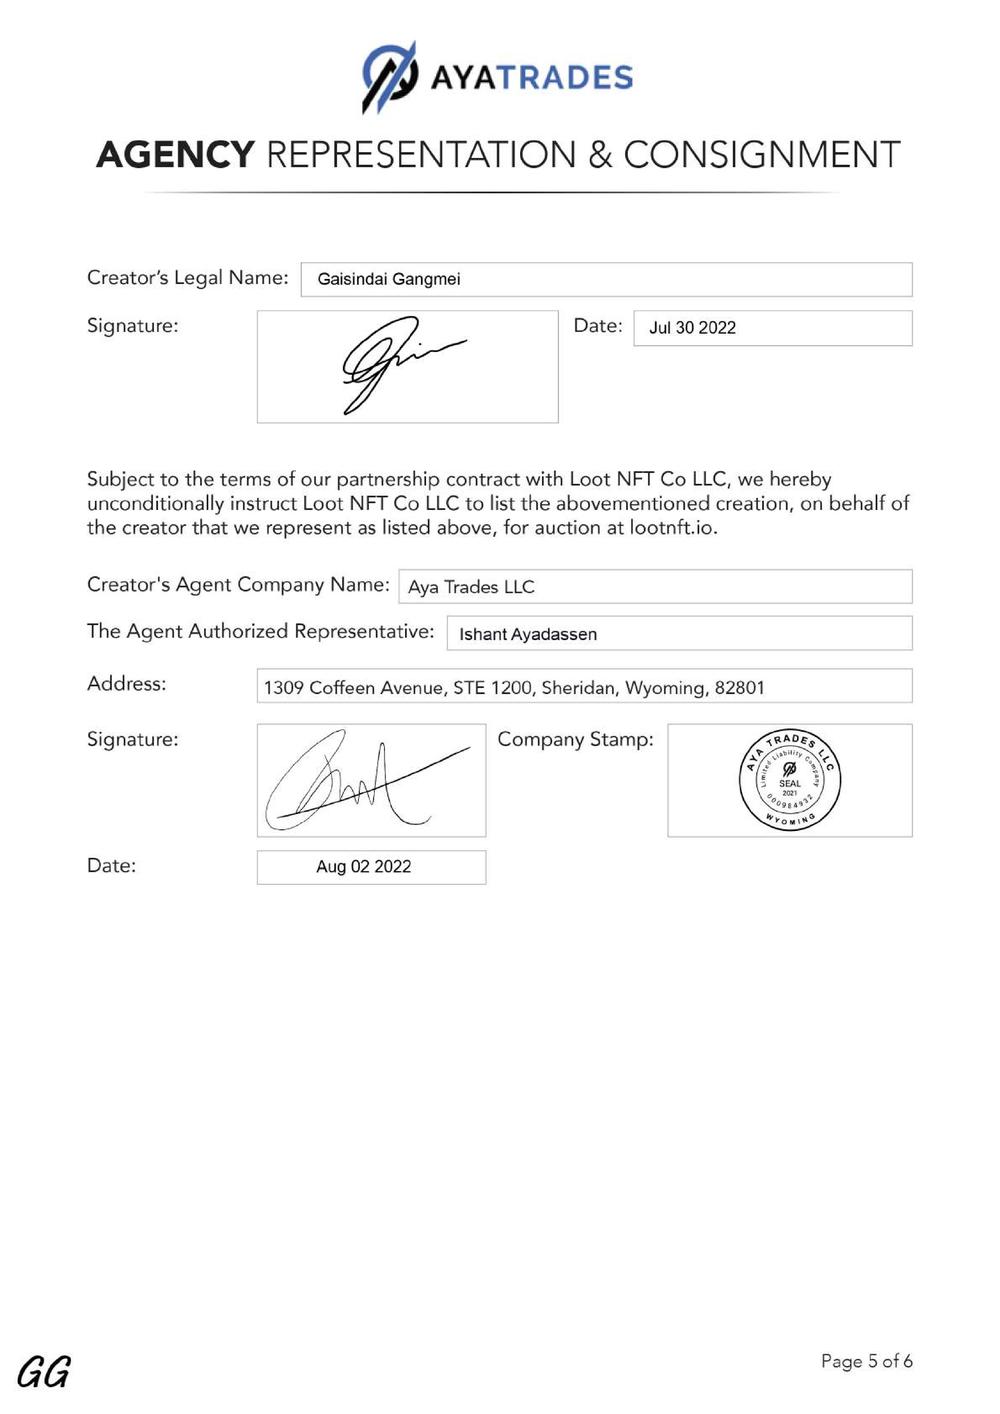 Certificate of Authenticity and Consignment - The Last Hope